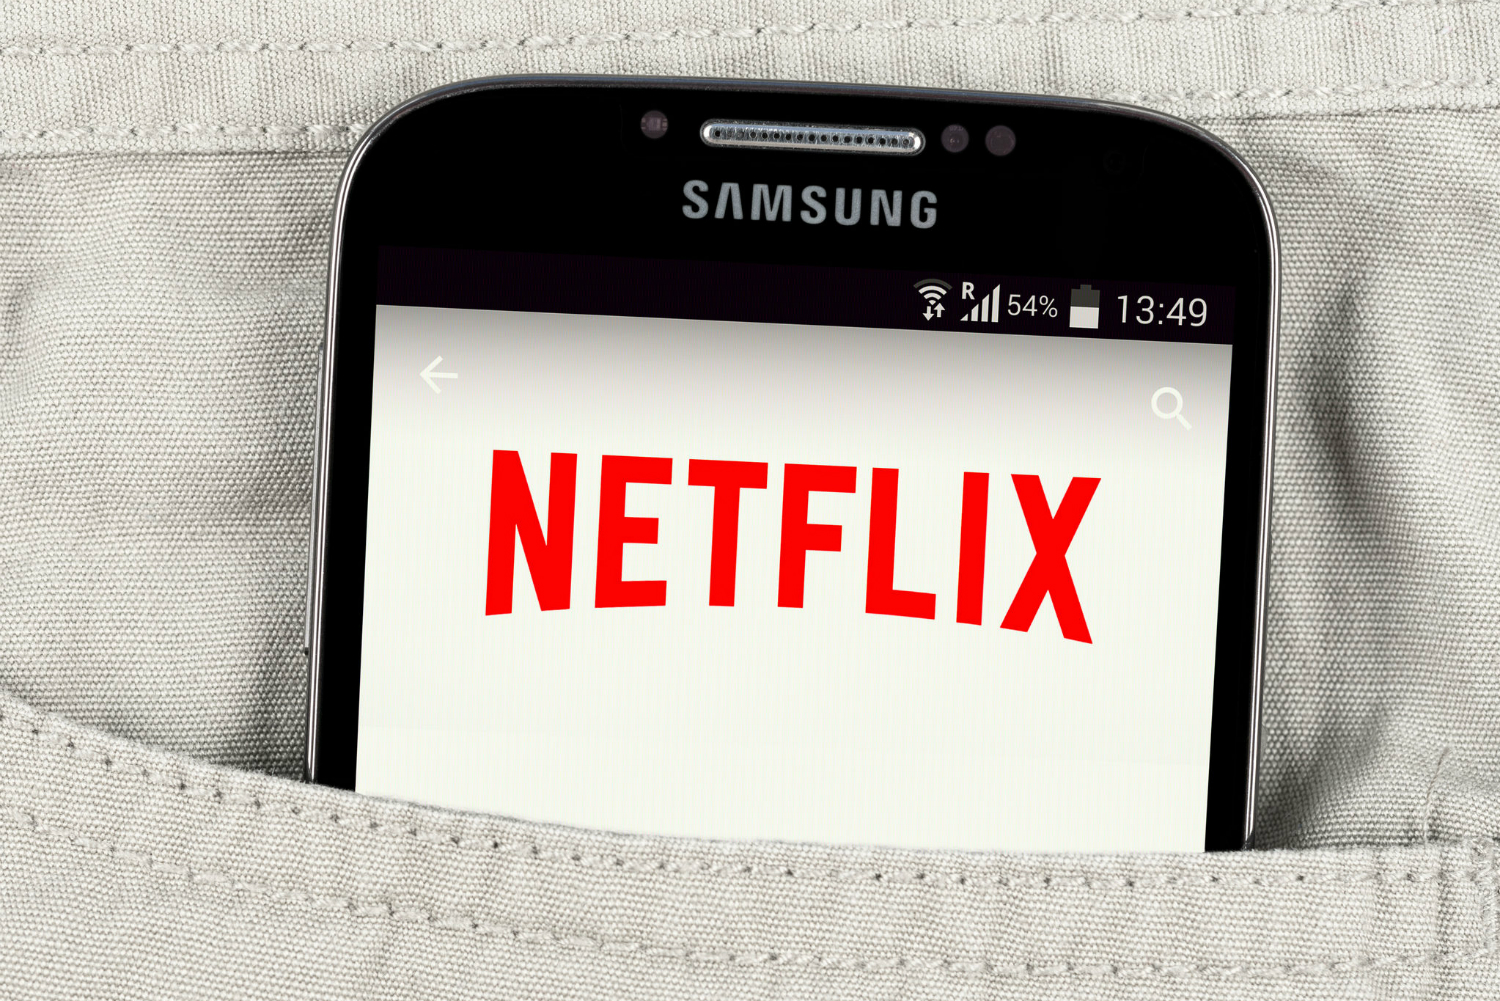 Netflix App Android Free Download